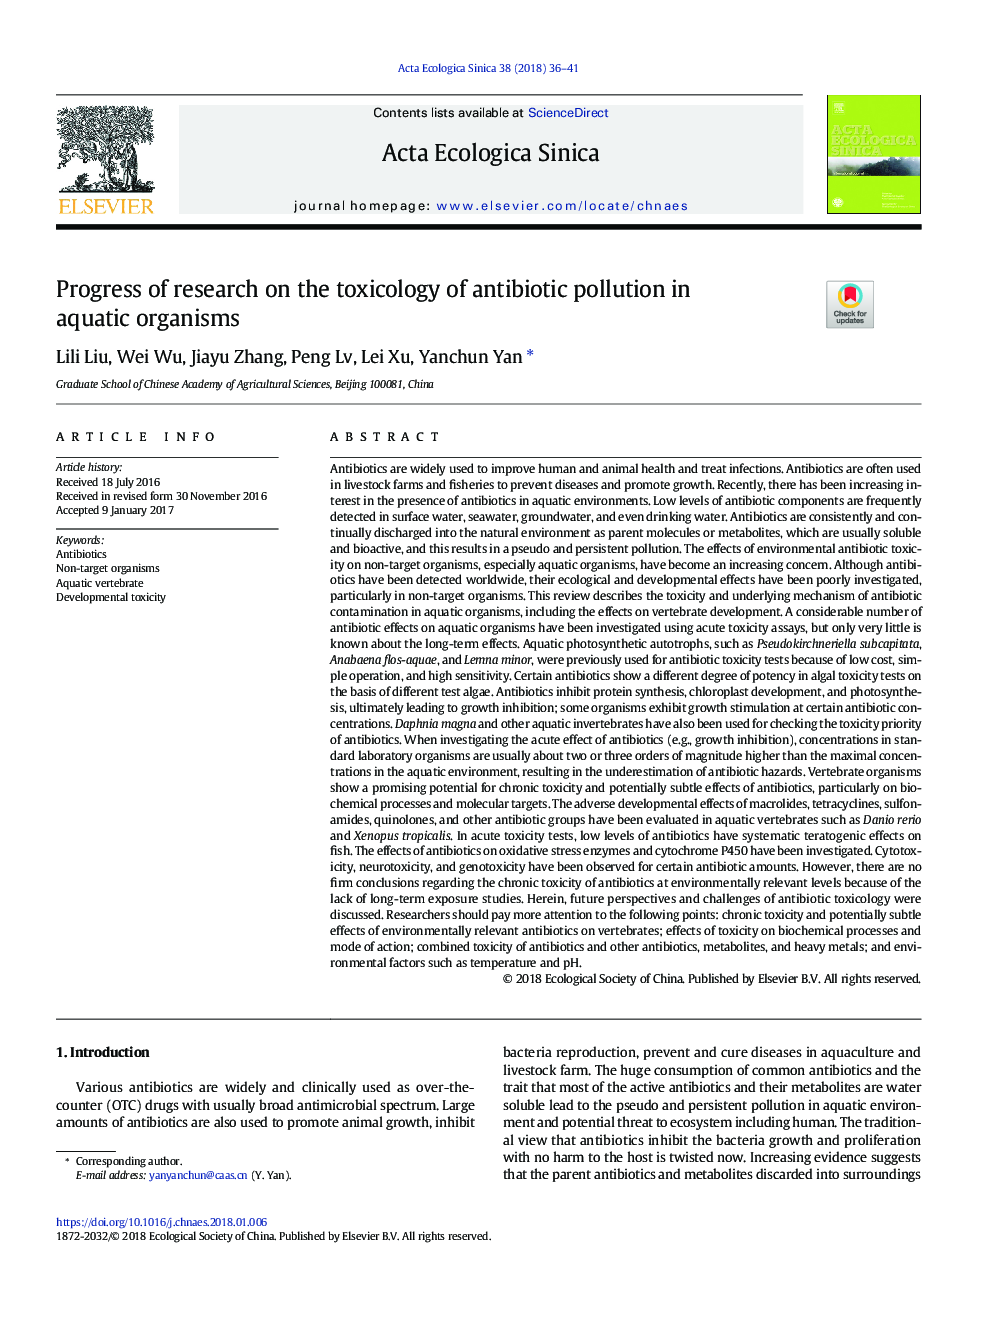 Progress of research on the toxicology of antibiotic pollution in aquatic organisms